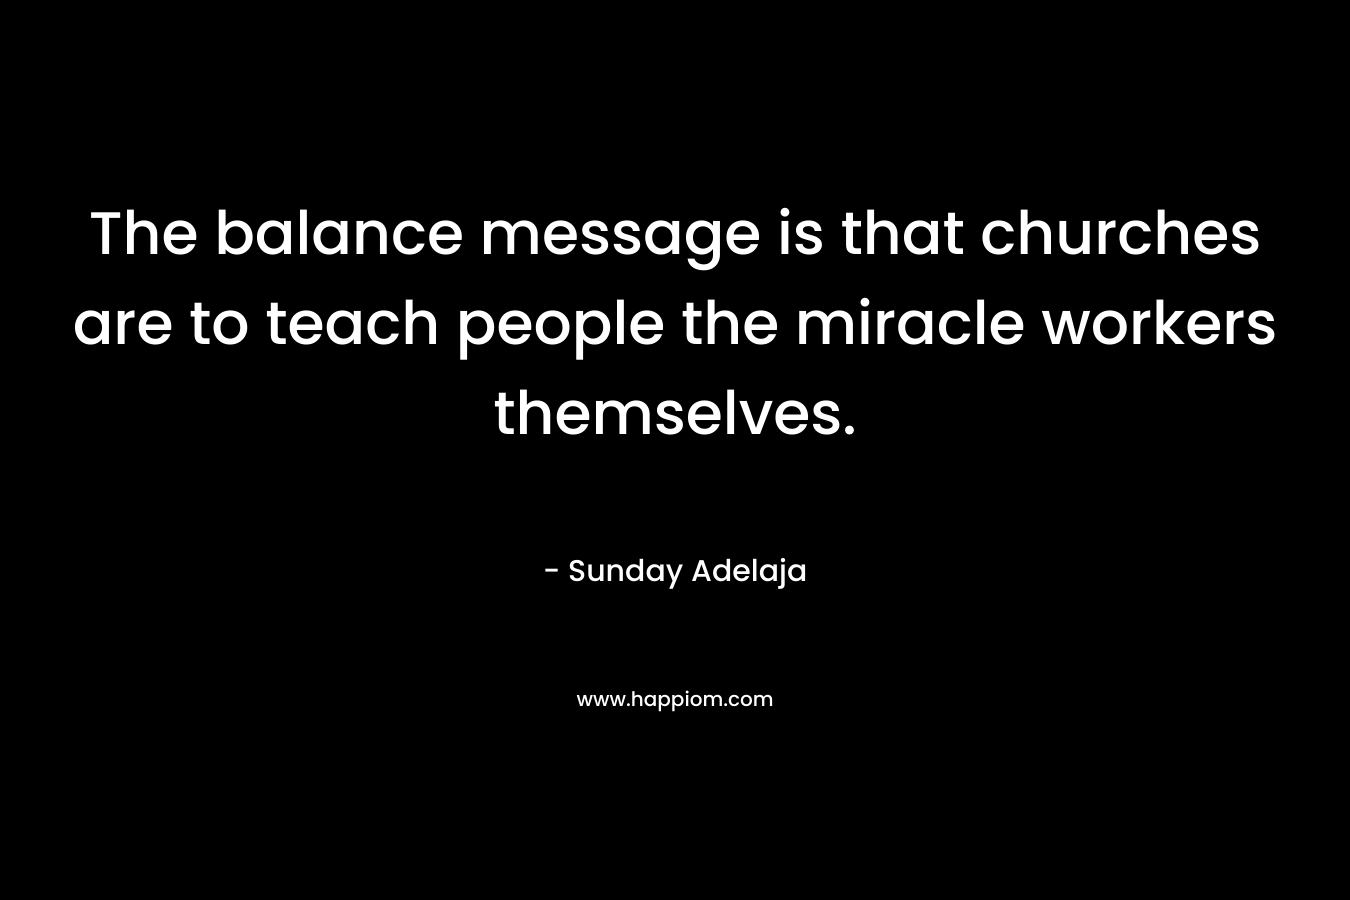 The balance message is that churches are to teach people the miracle workers themselves. – Sunday Adelaja